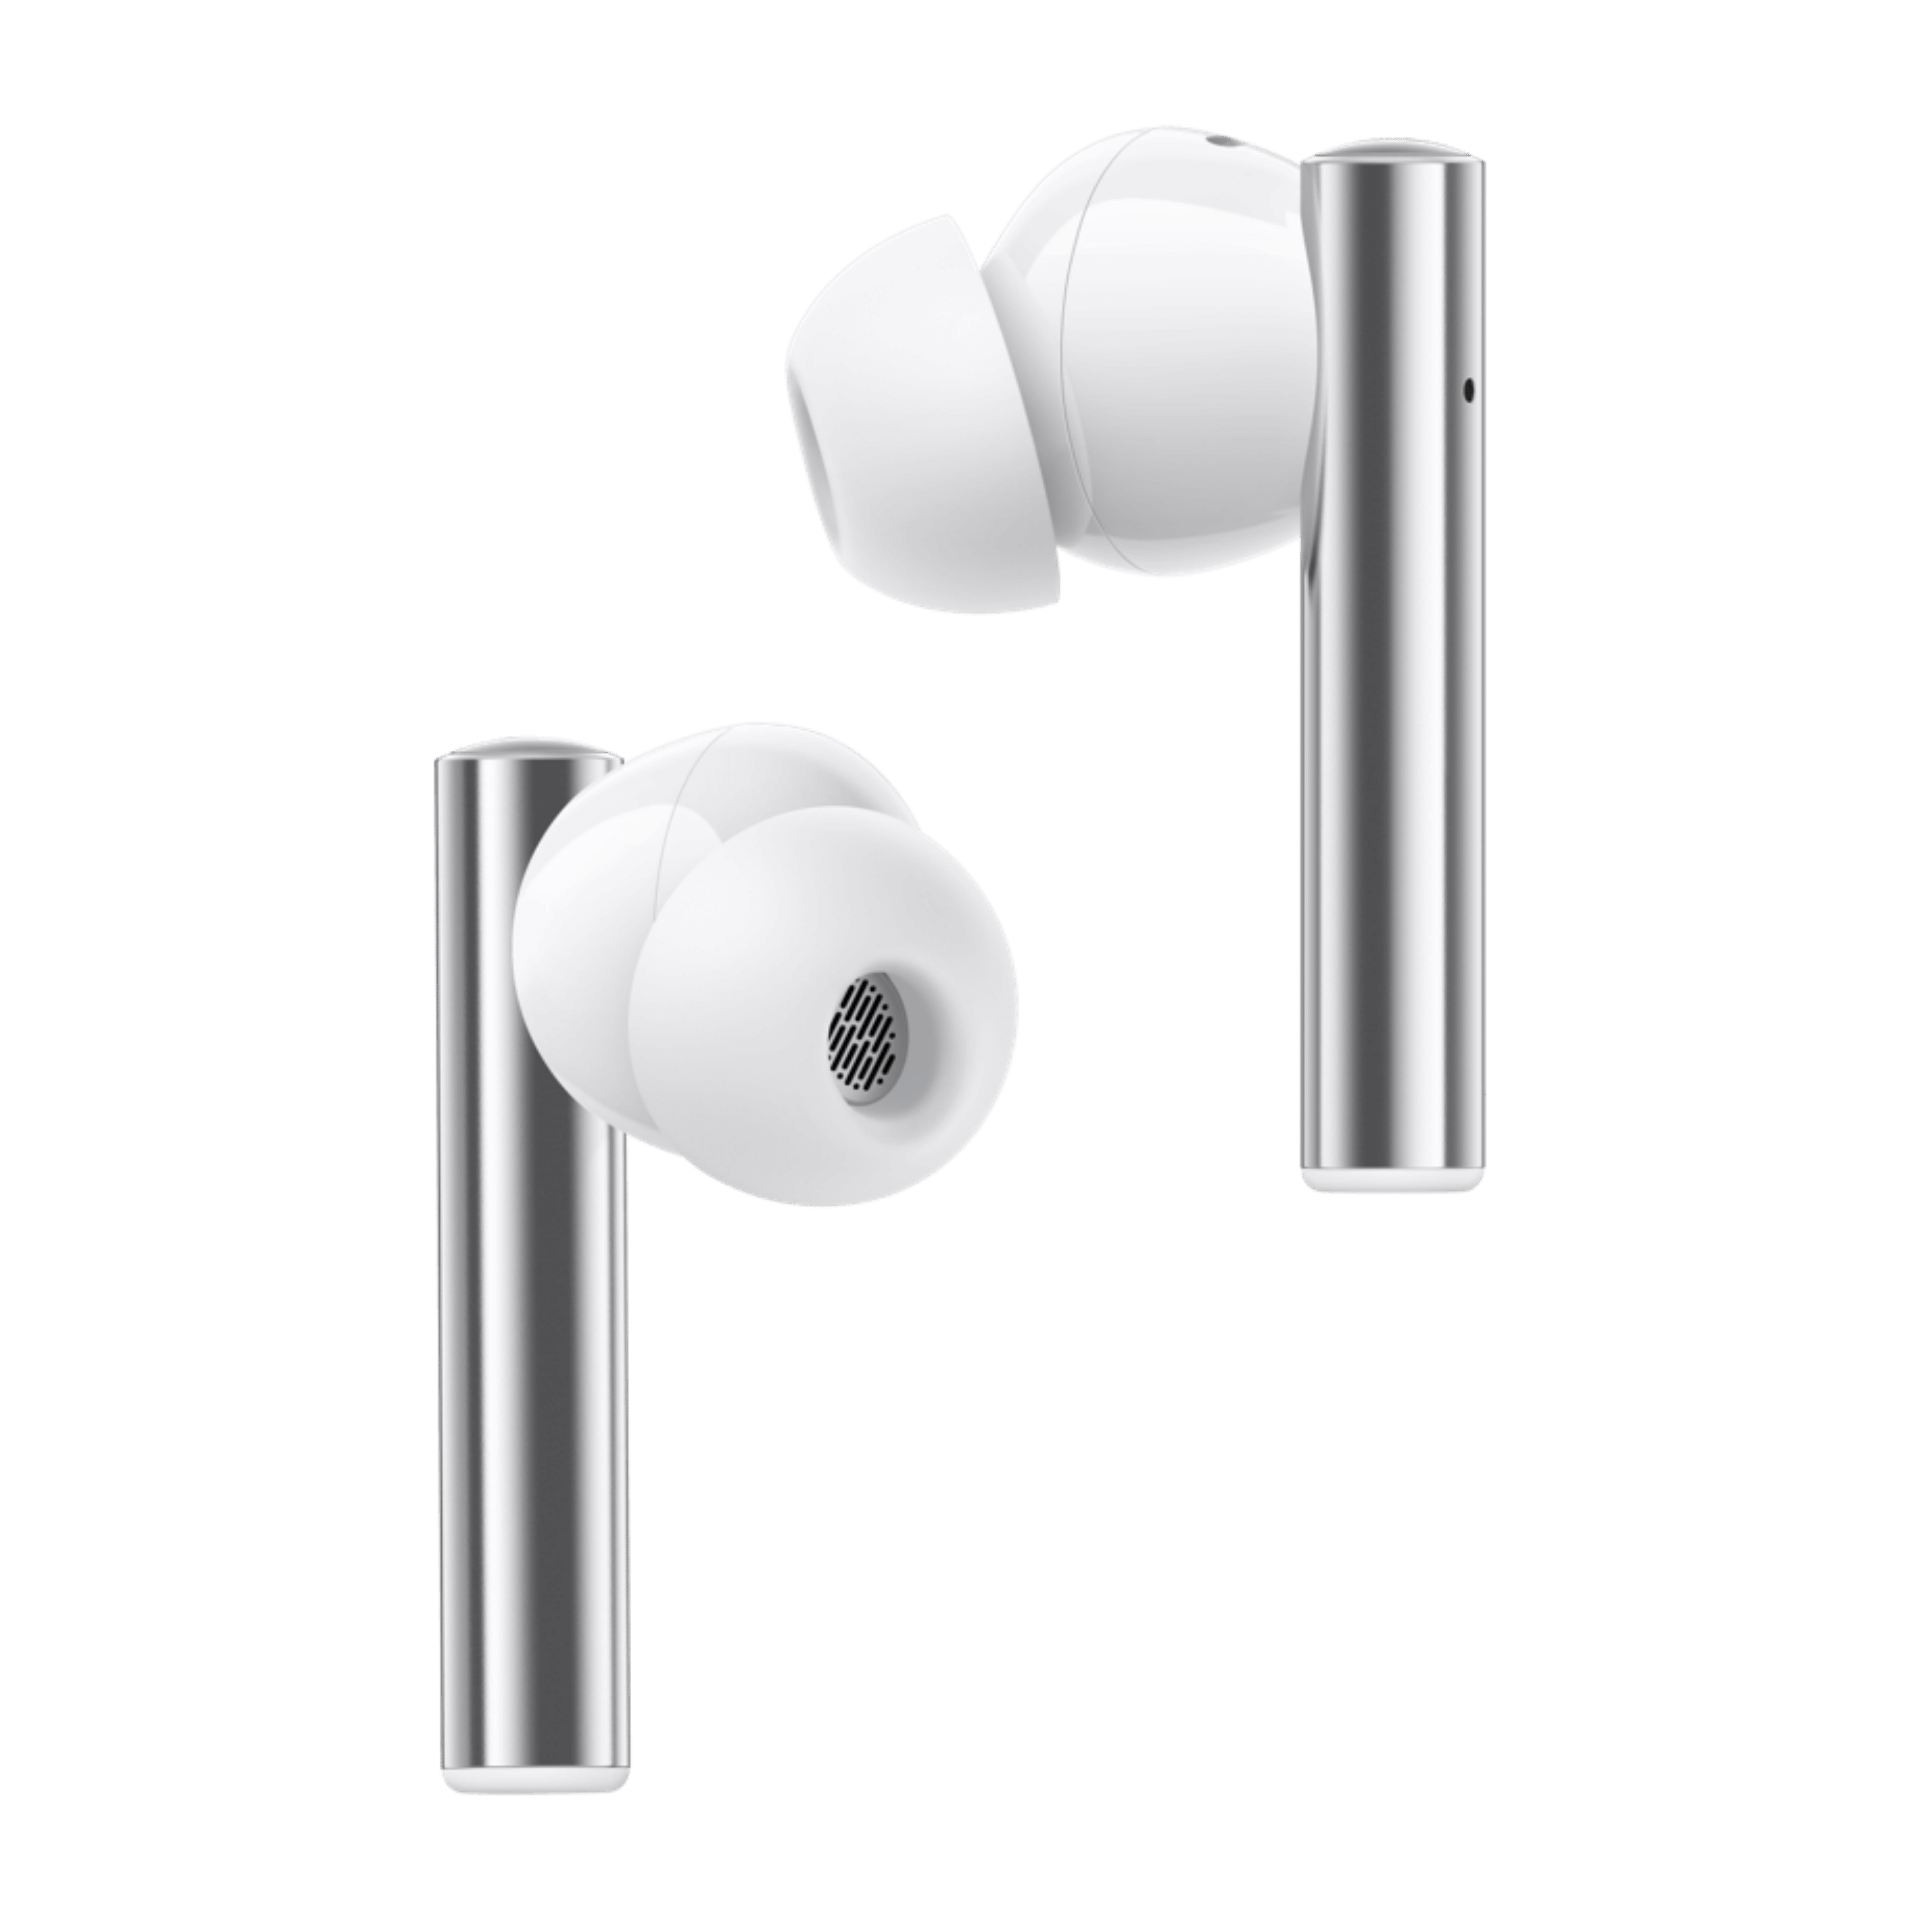 Product Image of Realme Buds Air 2 in White